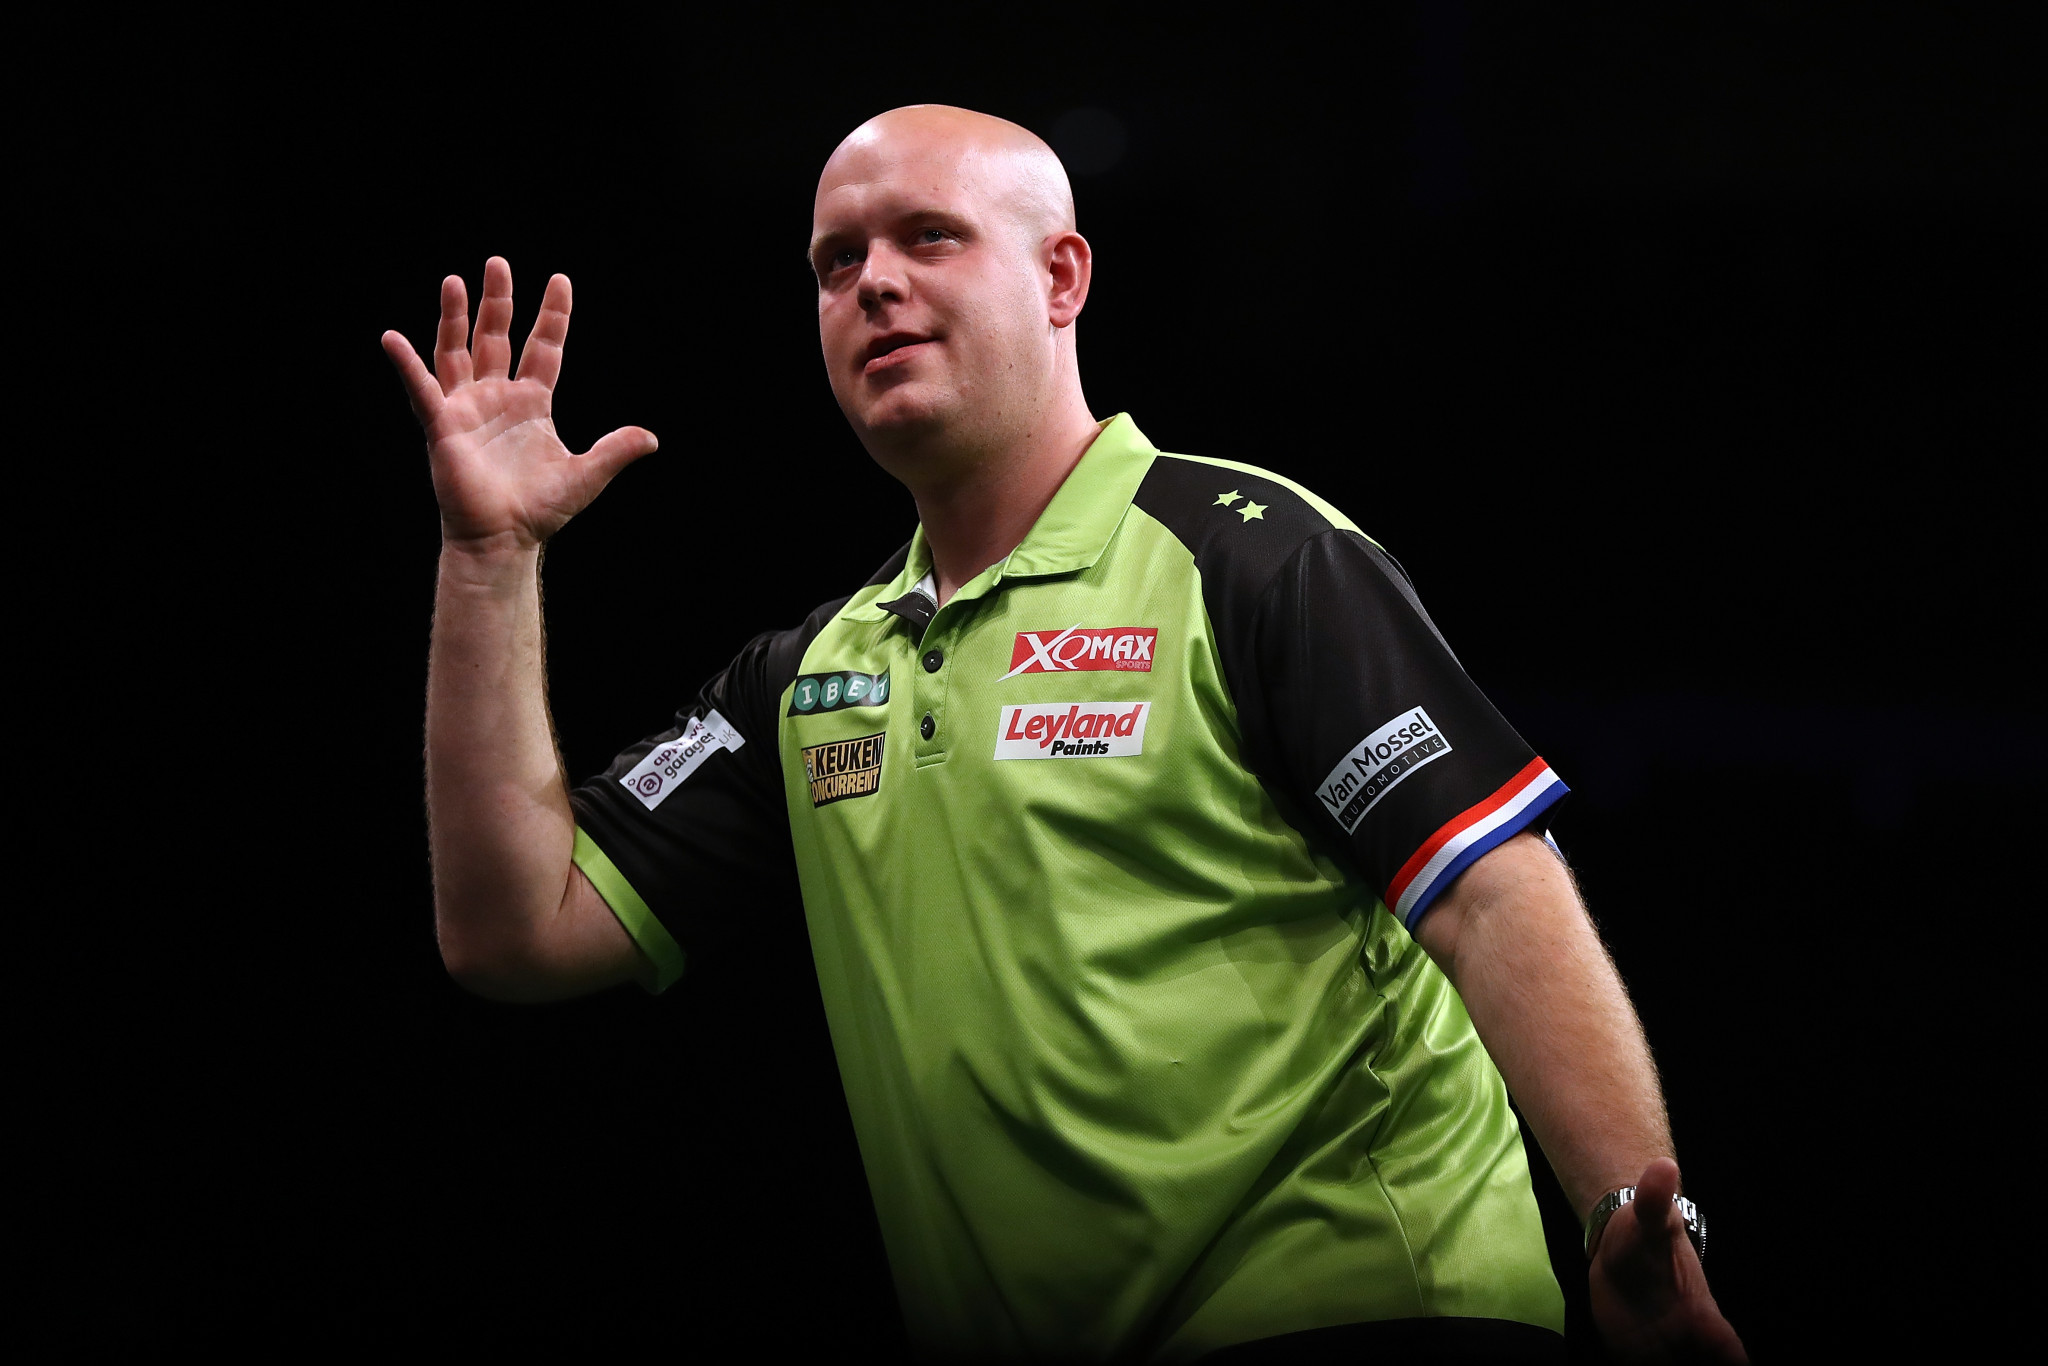 Reigning champions The Netherlands reach round two at World Cup of Darts